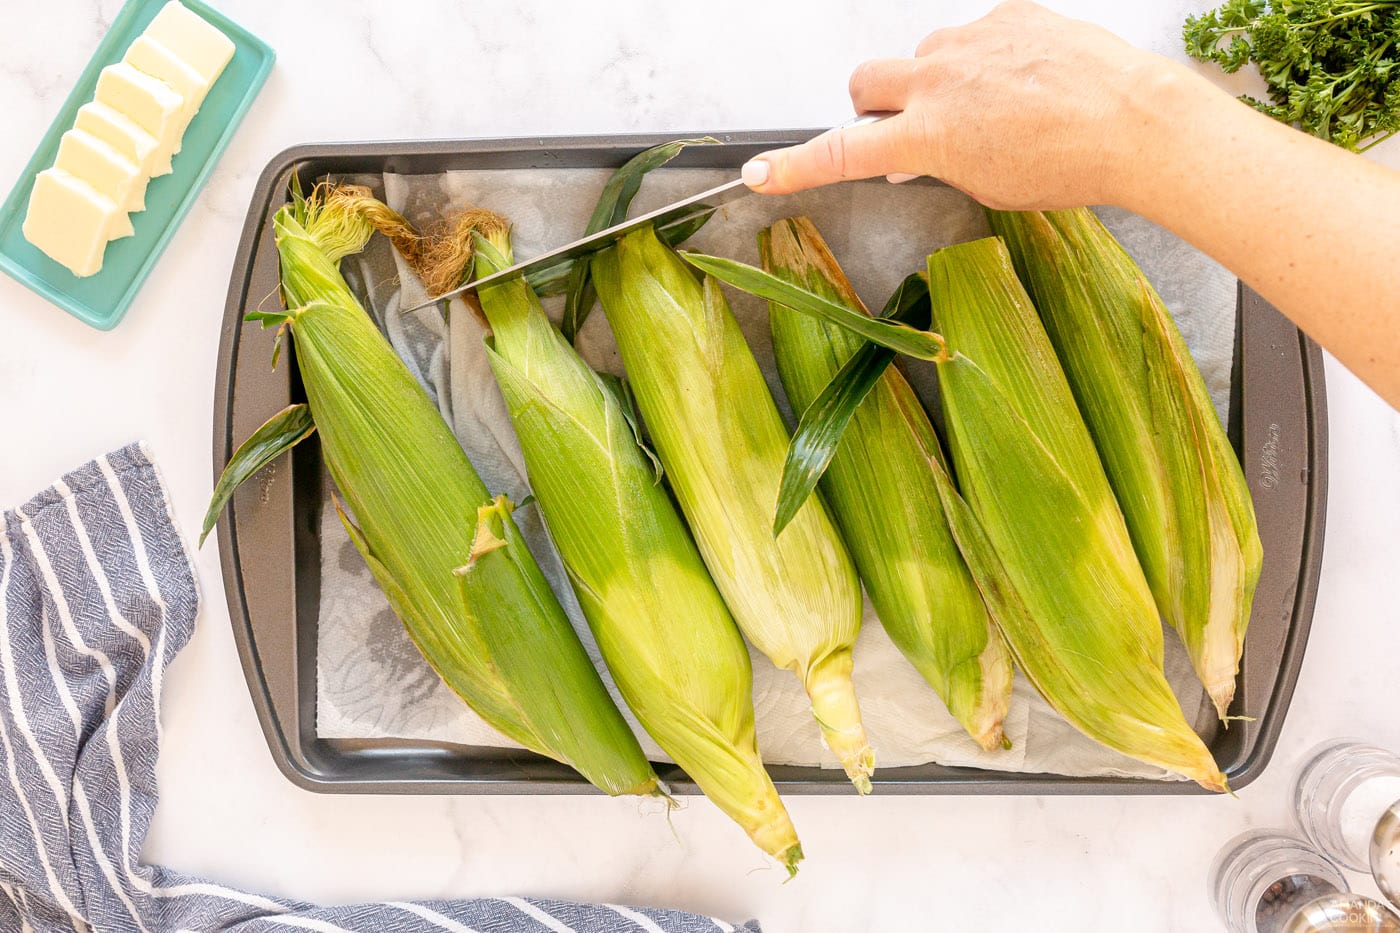 corn drying on a baking sheet with paper towels